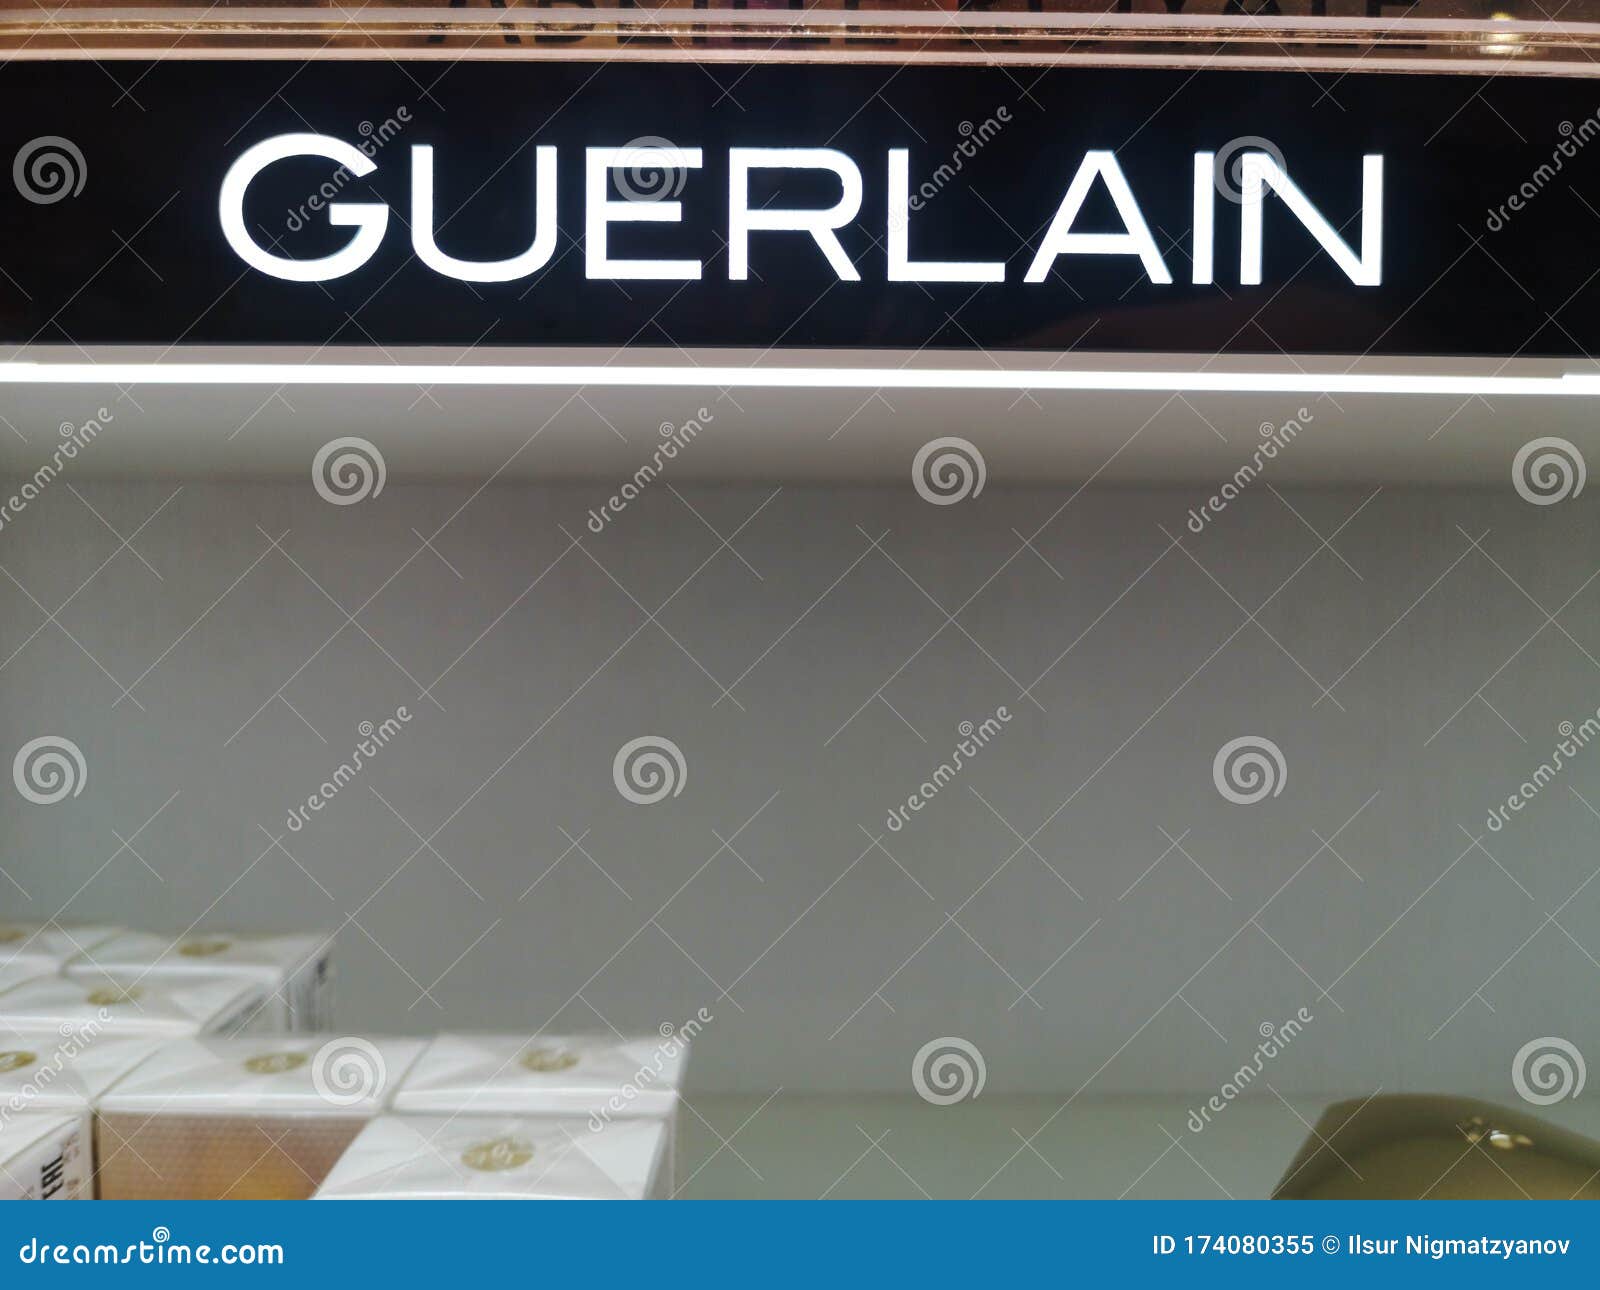 Guerlain Sign Owned by Louis Vuitton Moet Hennessy LVMH Corporation in  Perfume and Cosmetics Store on February 10, 2020 in Russia Editorial Image  - Image of guerlain, body: 174080355